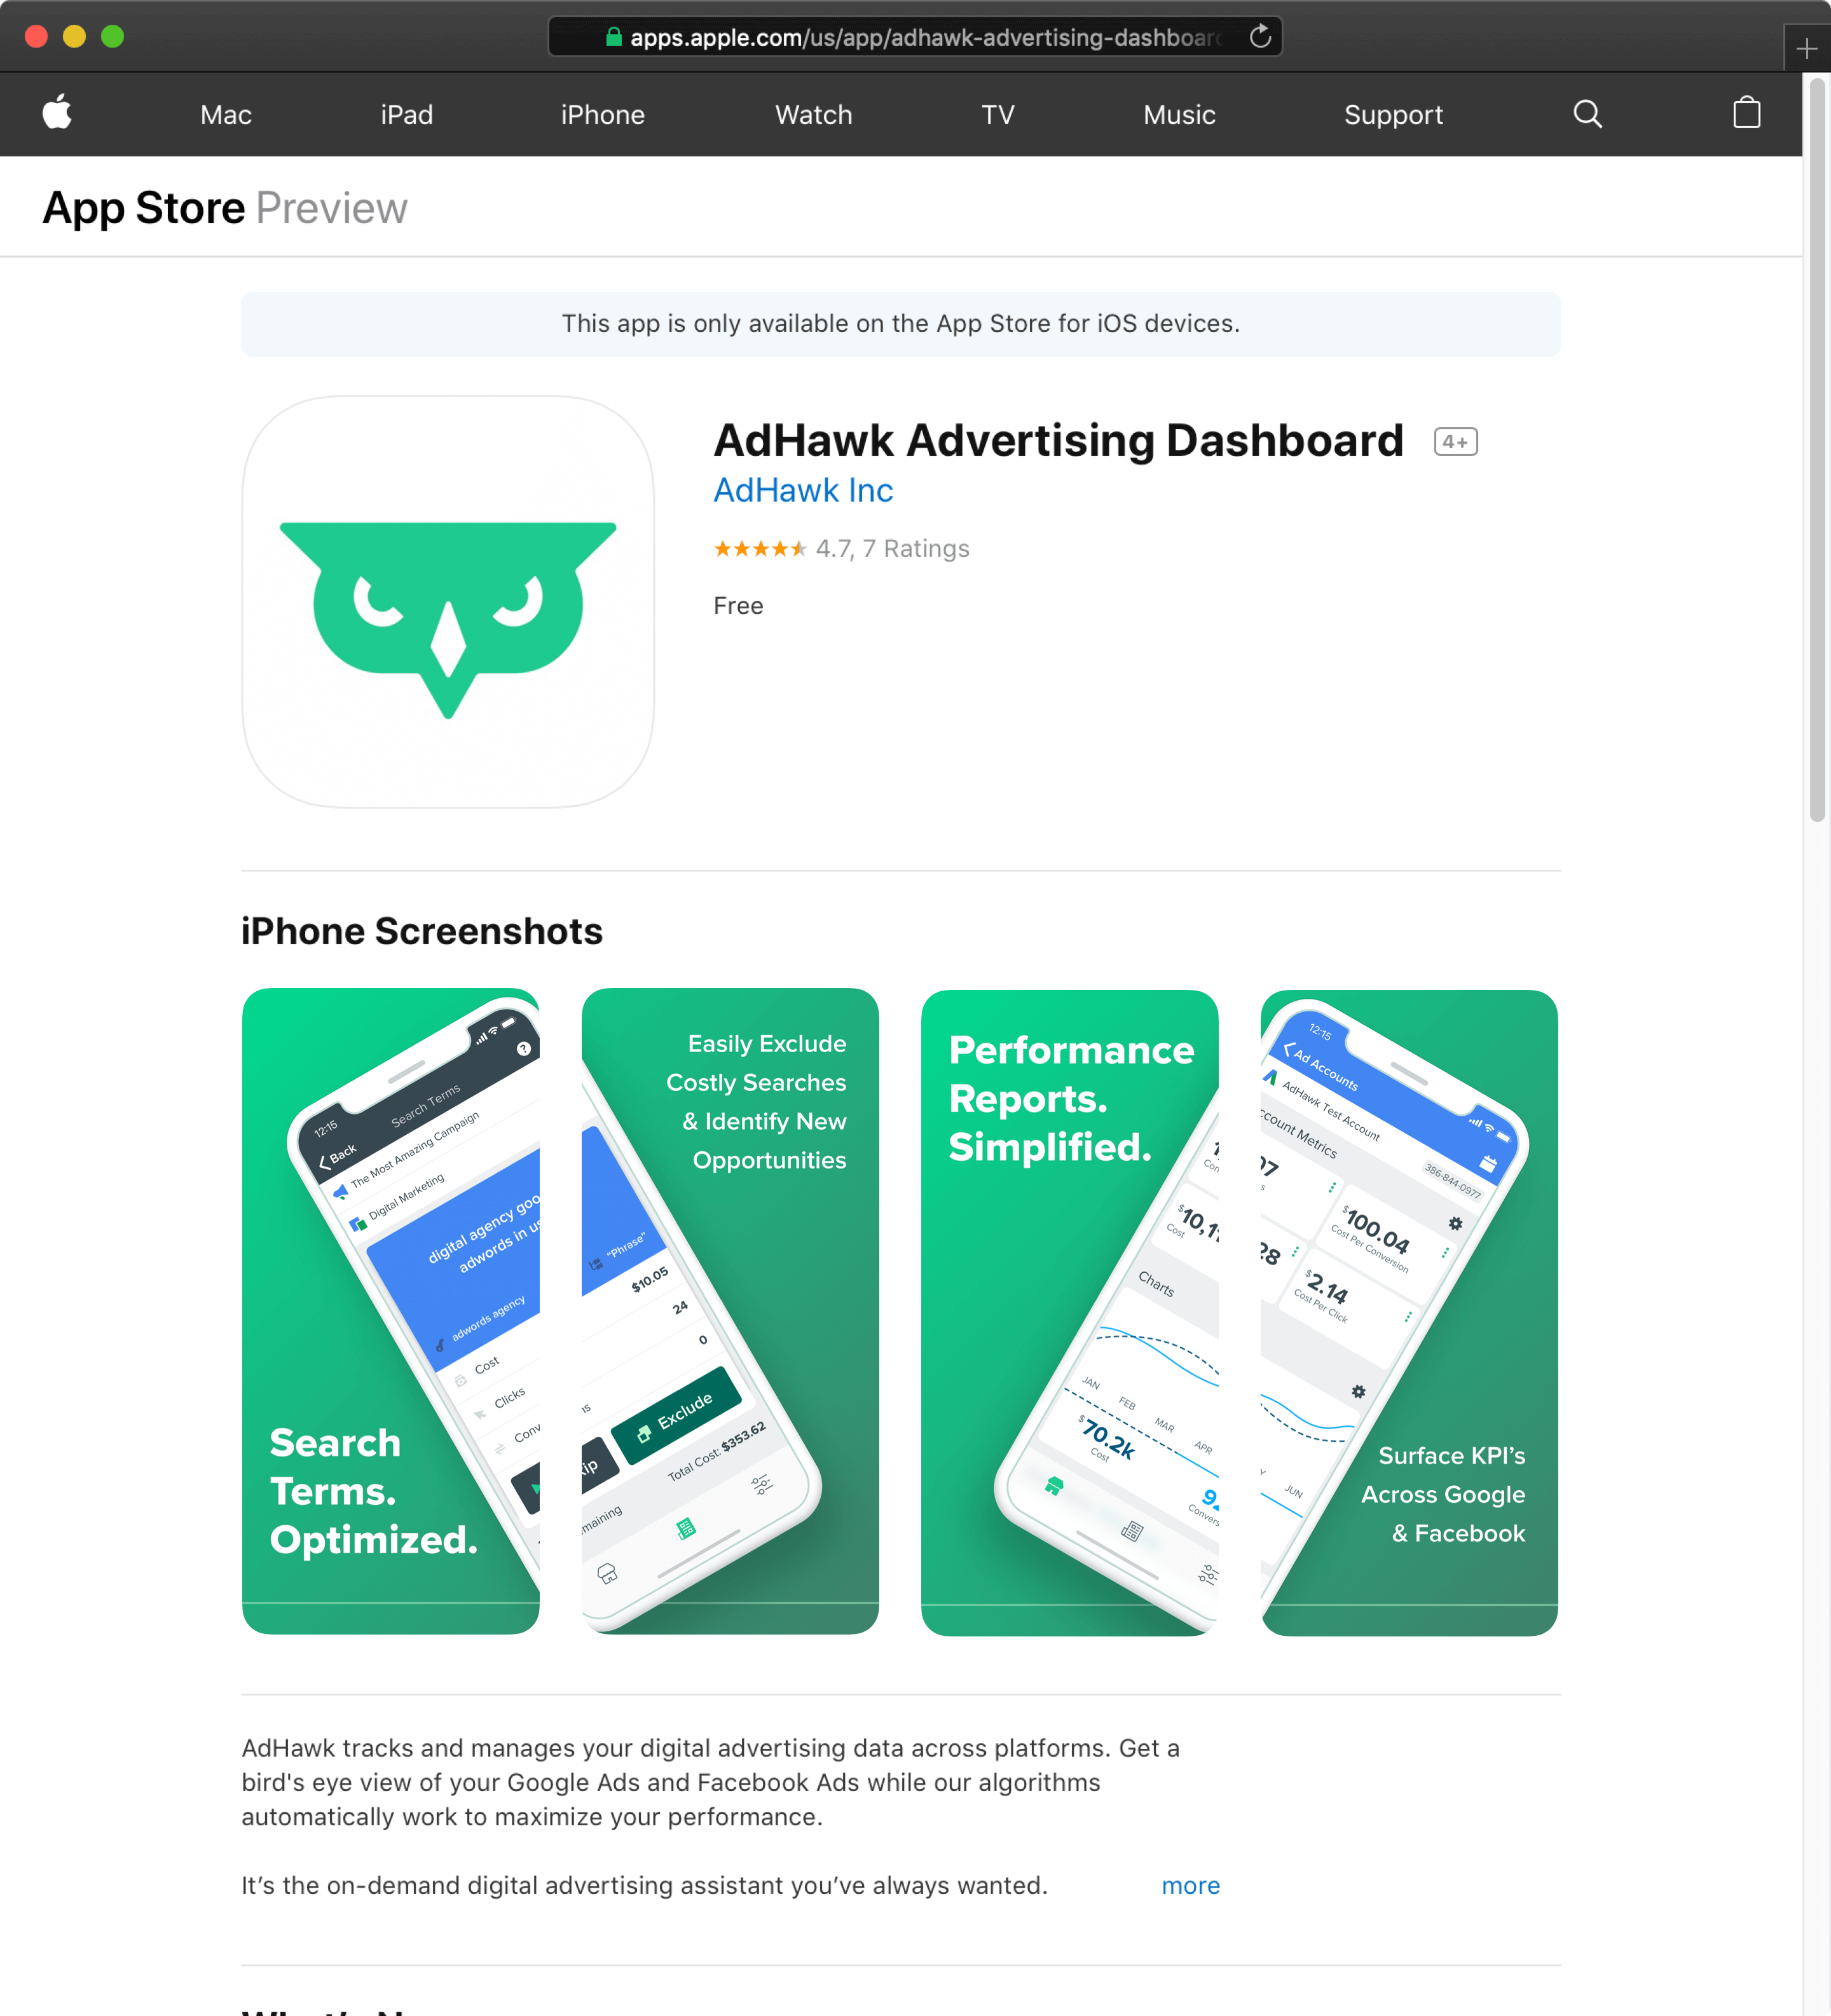 4.7 out of 5 Rating in App Store